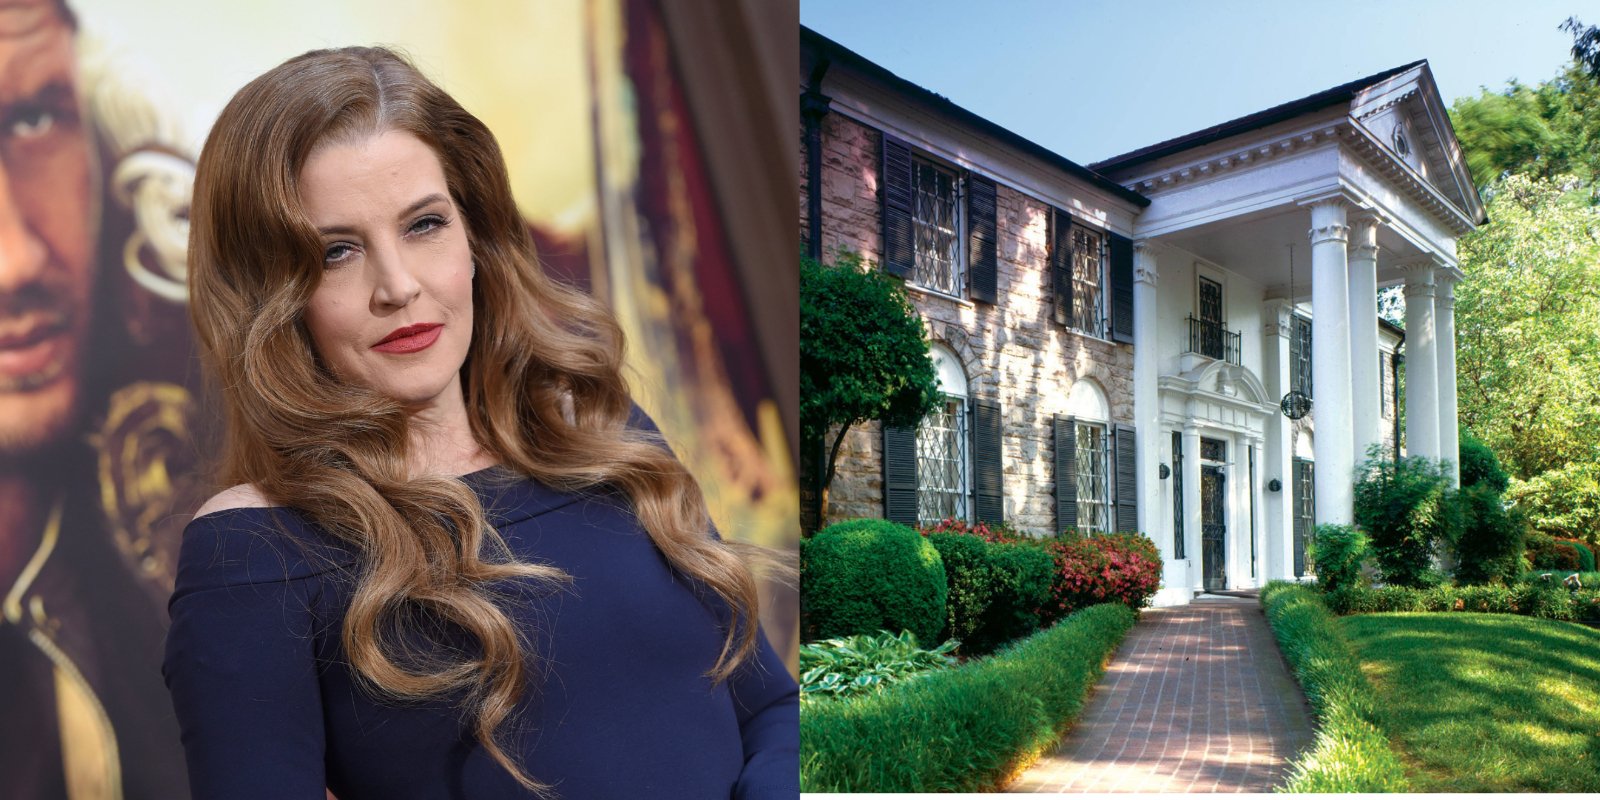 Side by side photos of Lisa Marie Presley and her Graceland home in Memphis, TN.